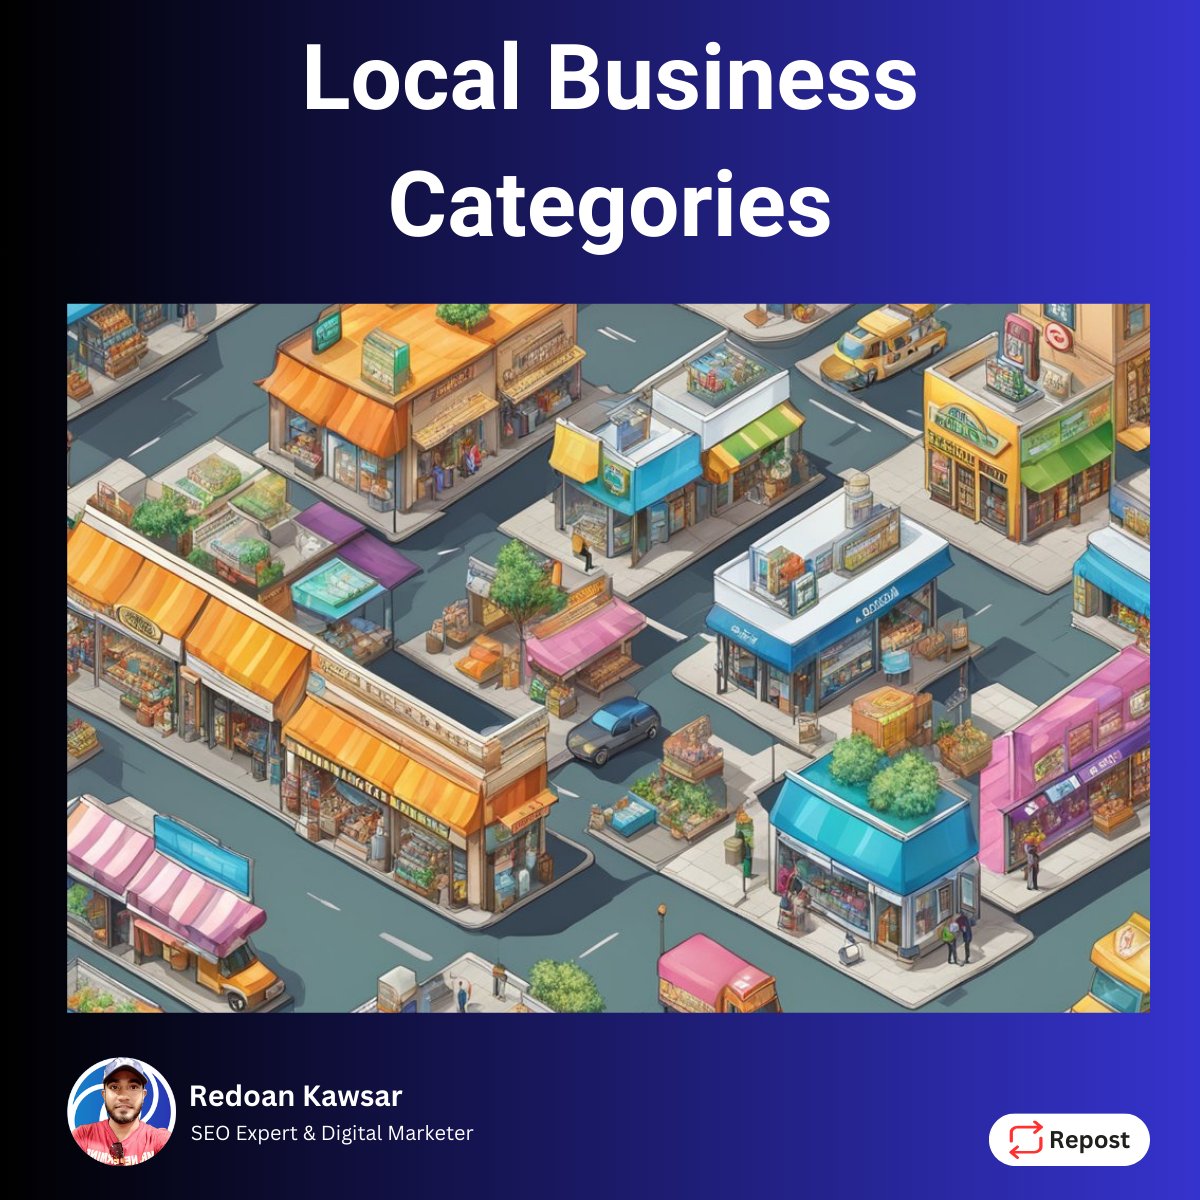 Local Business Categories:

- Define business with local categories 📝
- Choose one primary category 🥇
- Add 2-4 related secondaries 🥈
- Avoid category overload ❌
- Pick customer-searched categories 🔍
- Update categories regularly ♻️

#SEOExperts  #SEOServices #LocalSEO #SEO